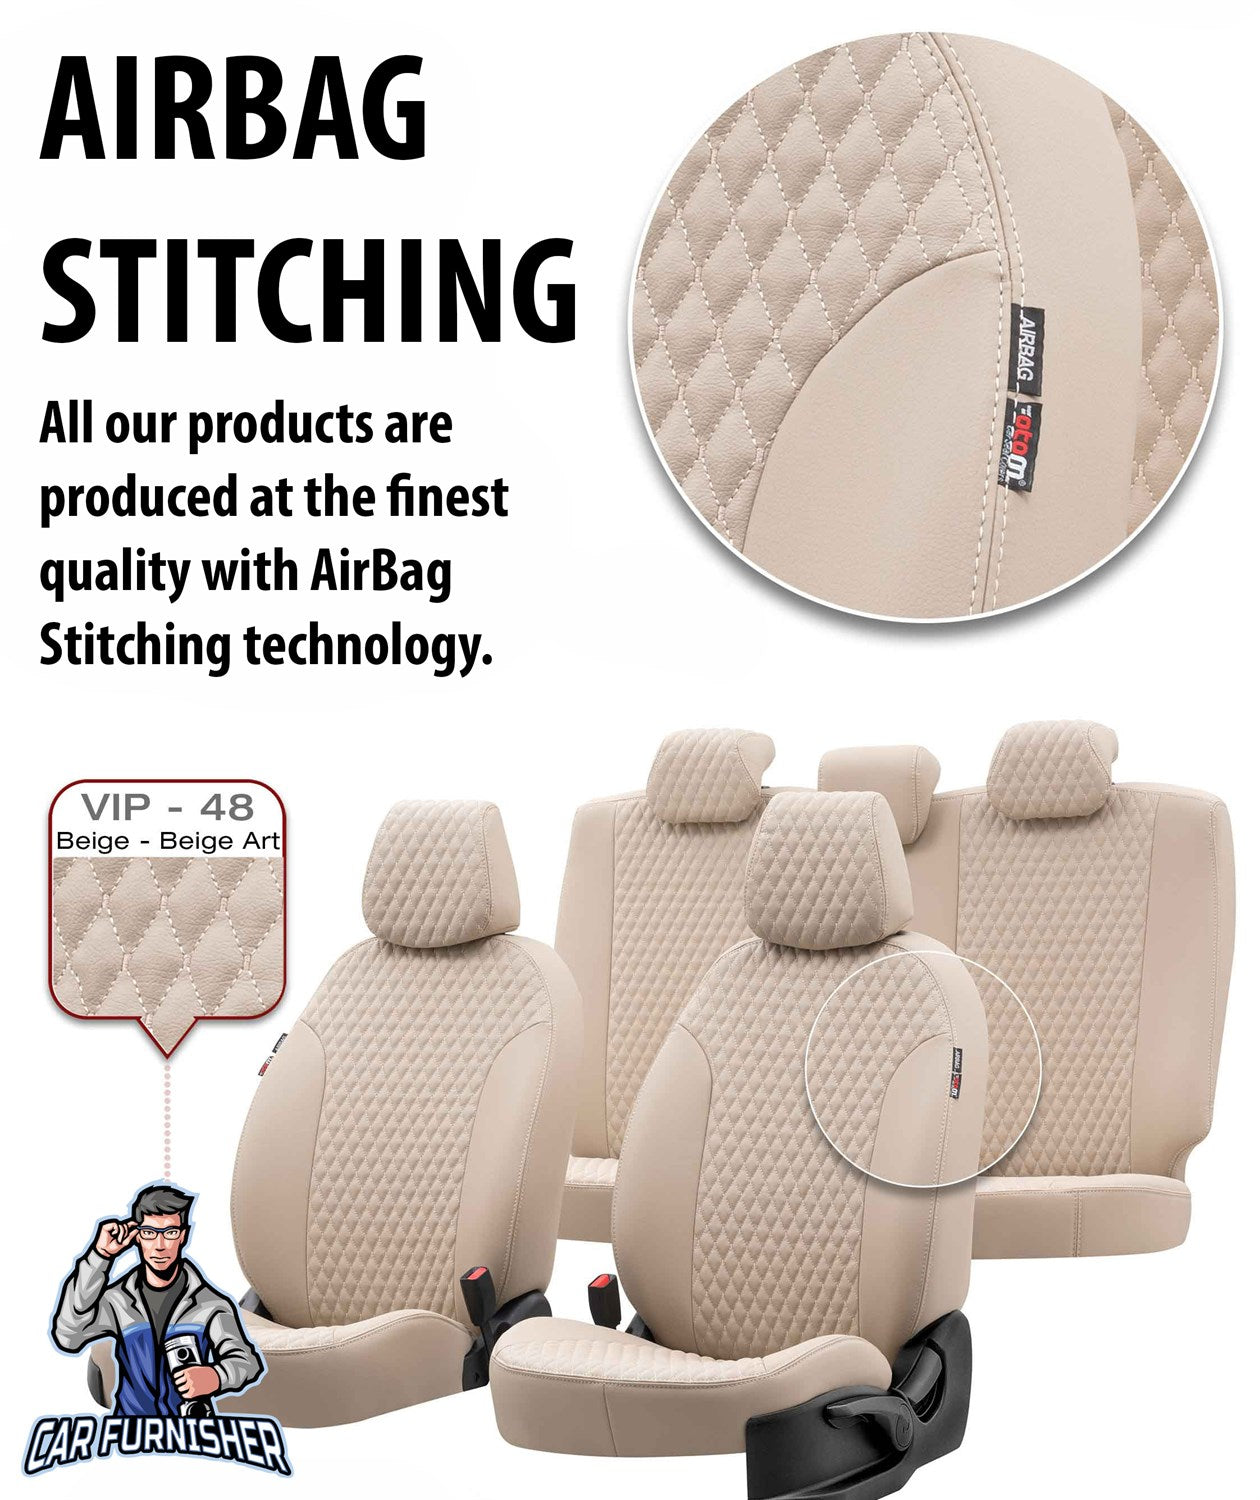 Citroen C3 Seat Covers Amsterdam Leather Design Beige Leather